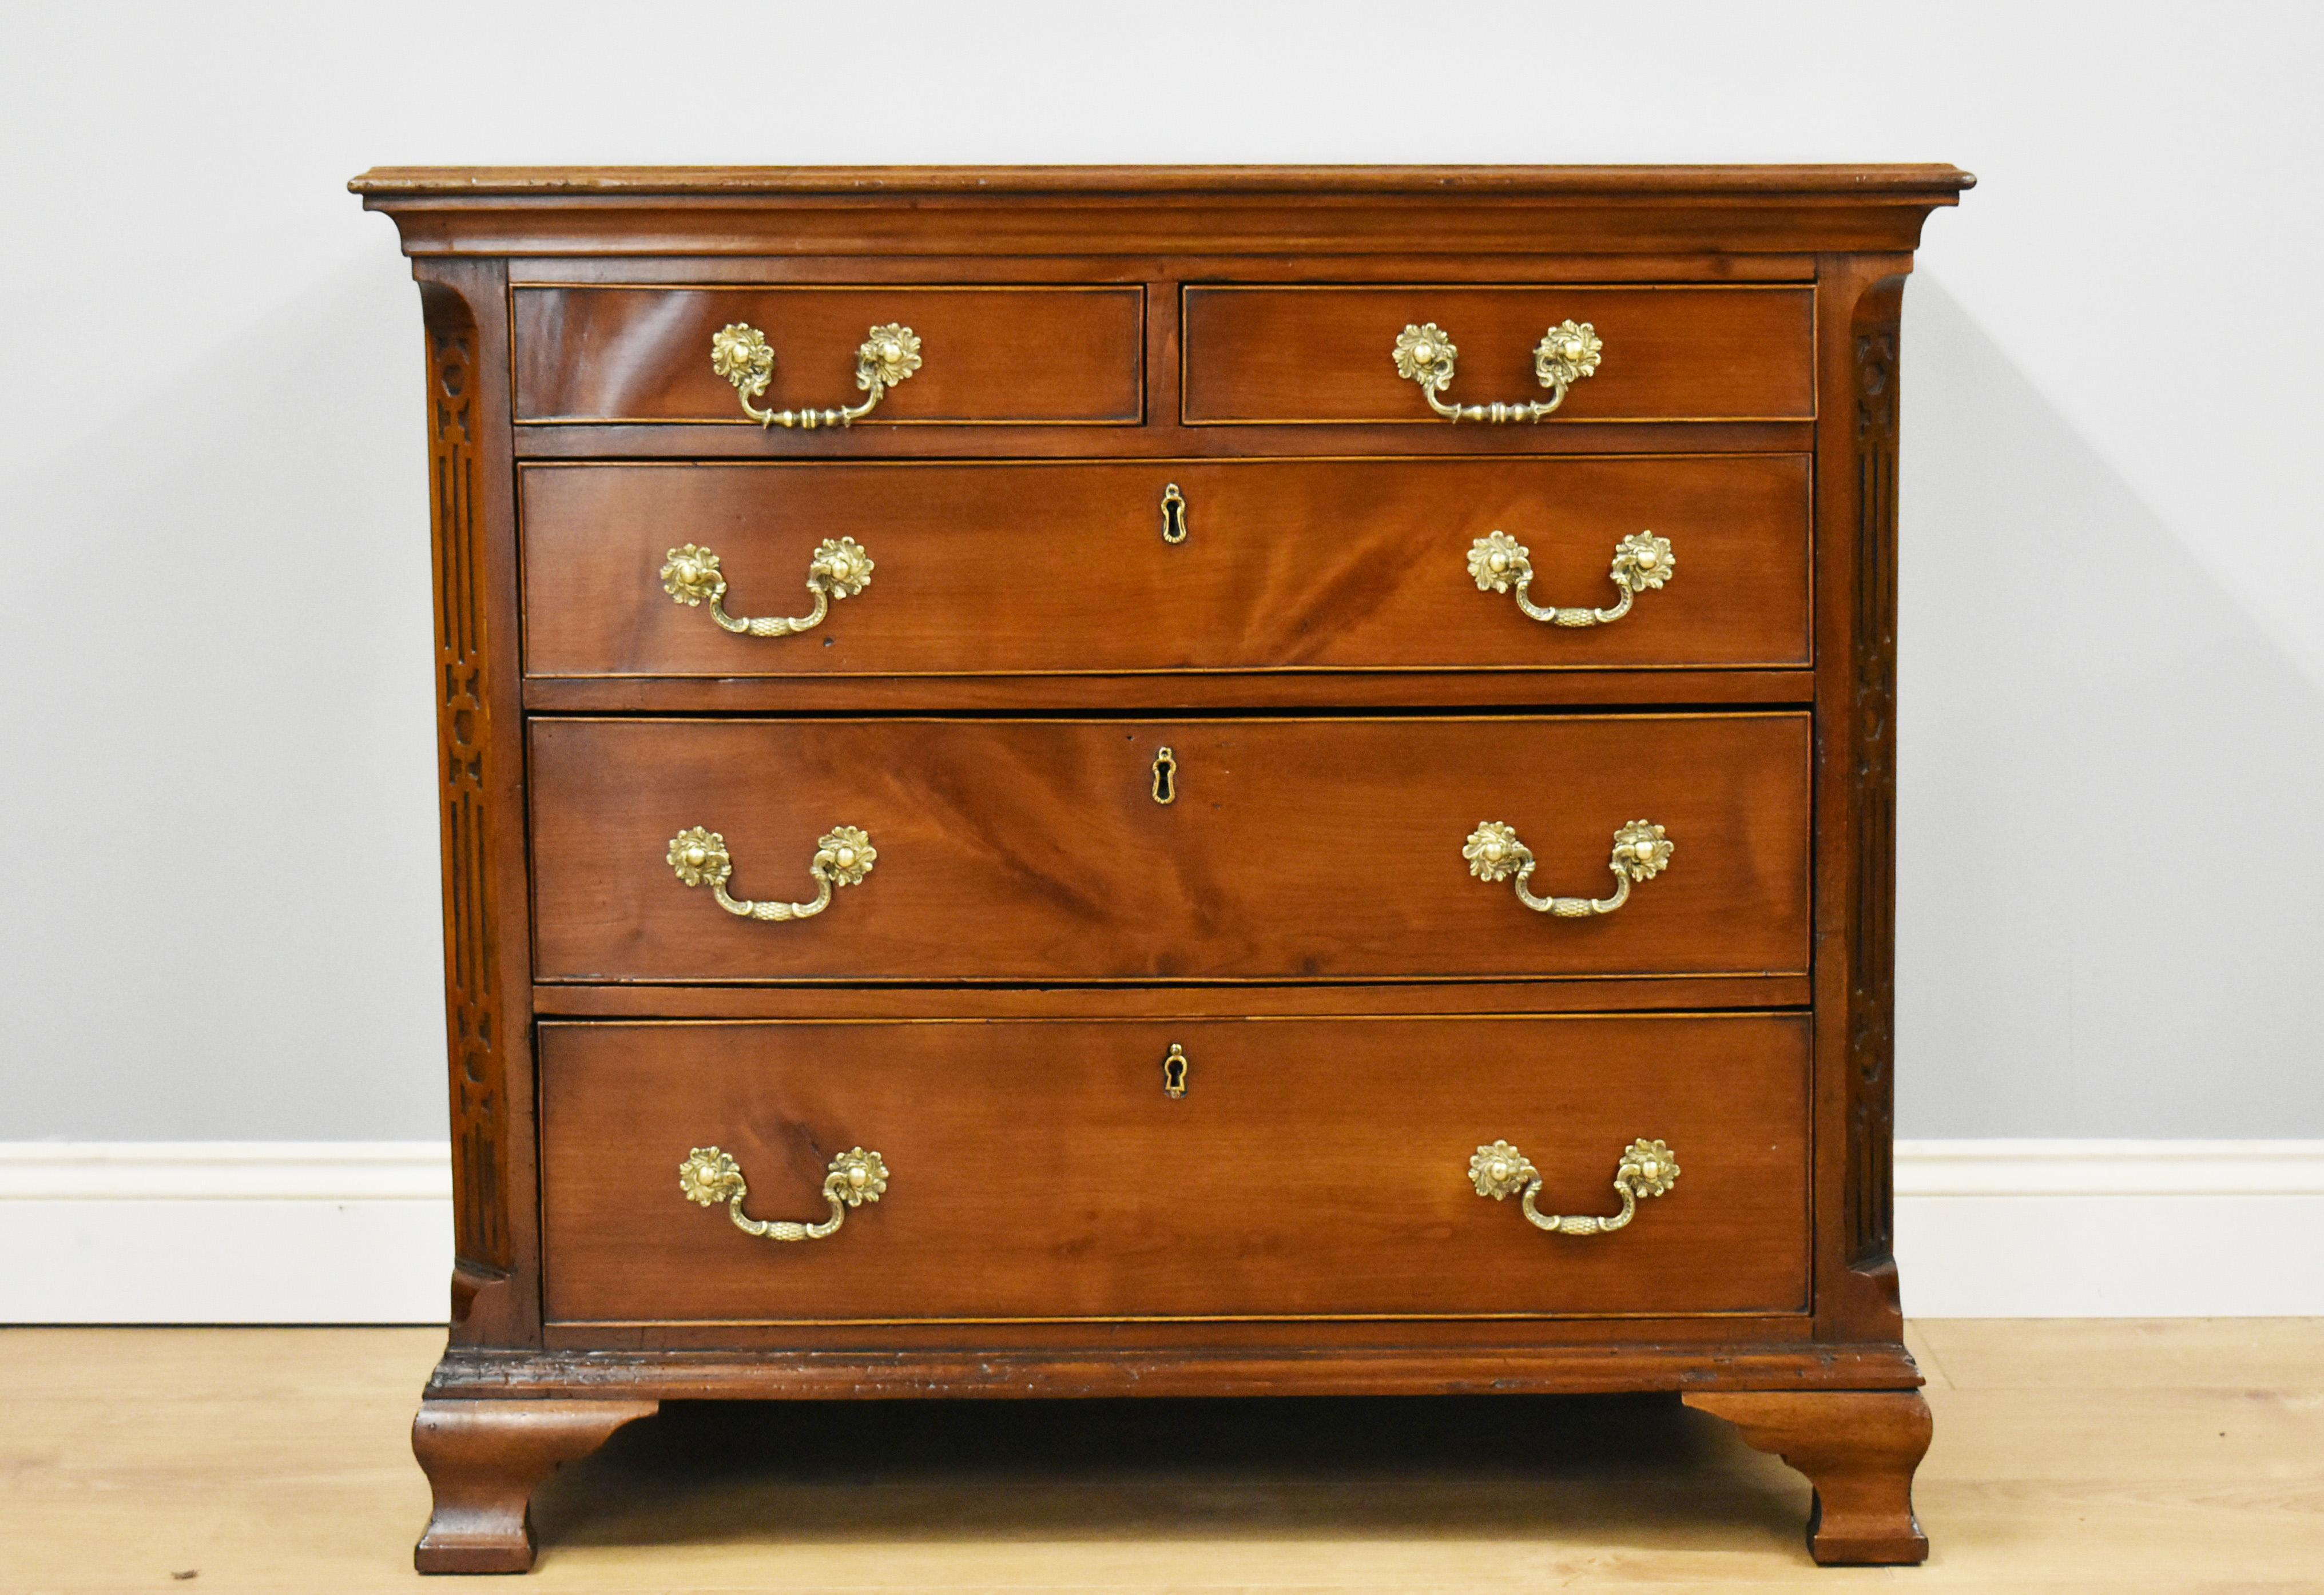 For sale is a good quality George III Mahogany chest of drawers of small proportions. Having two small drawers at the top, with three graduated drawers below, each with ornate brass handles. The chest has canted corners with blind fretwork